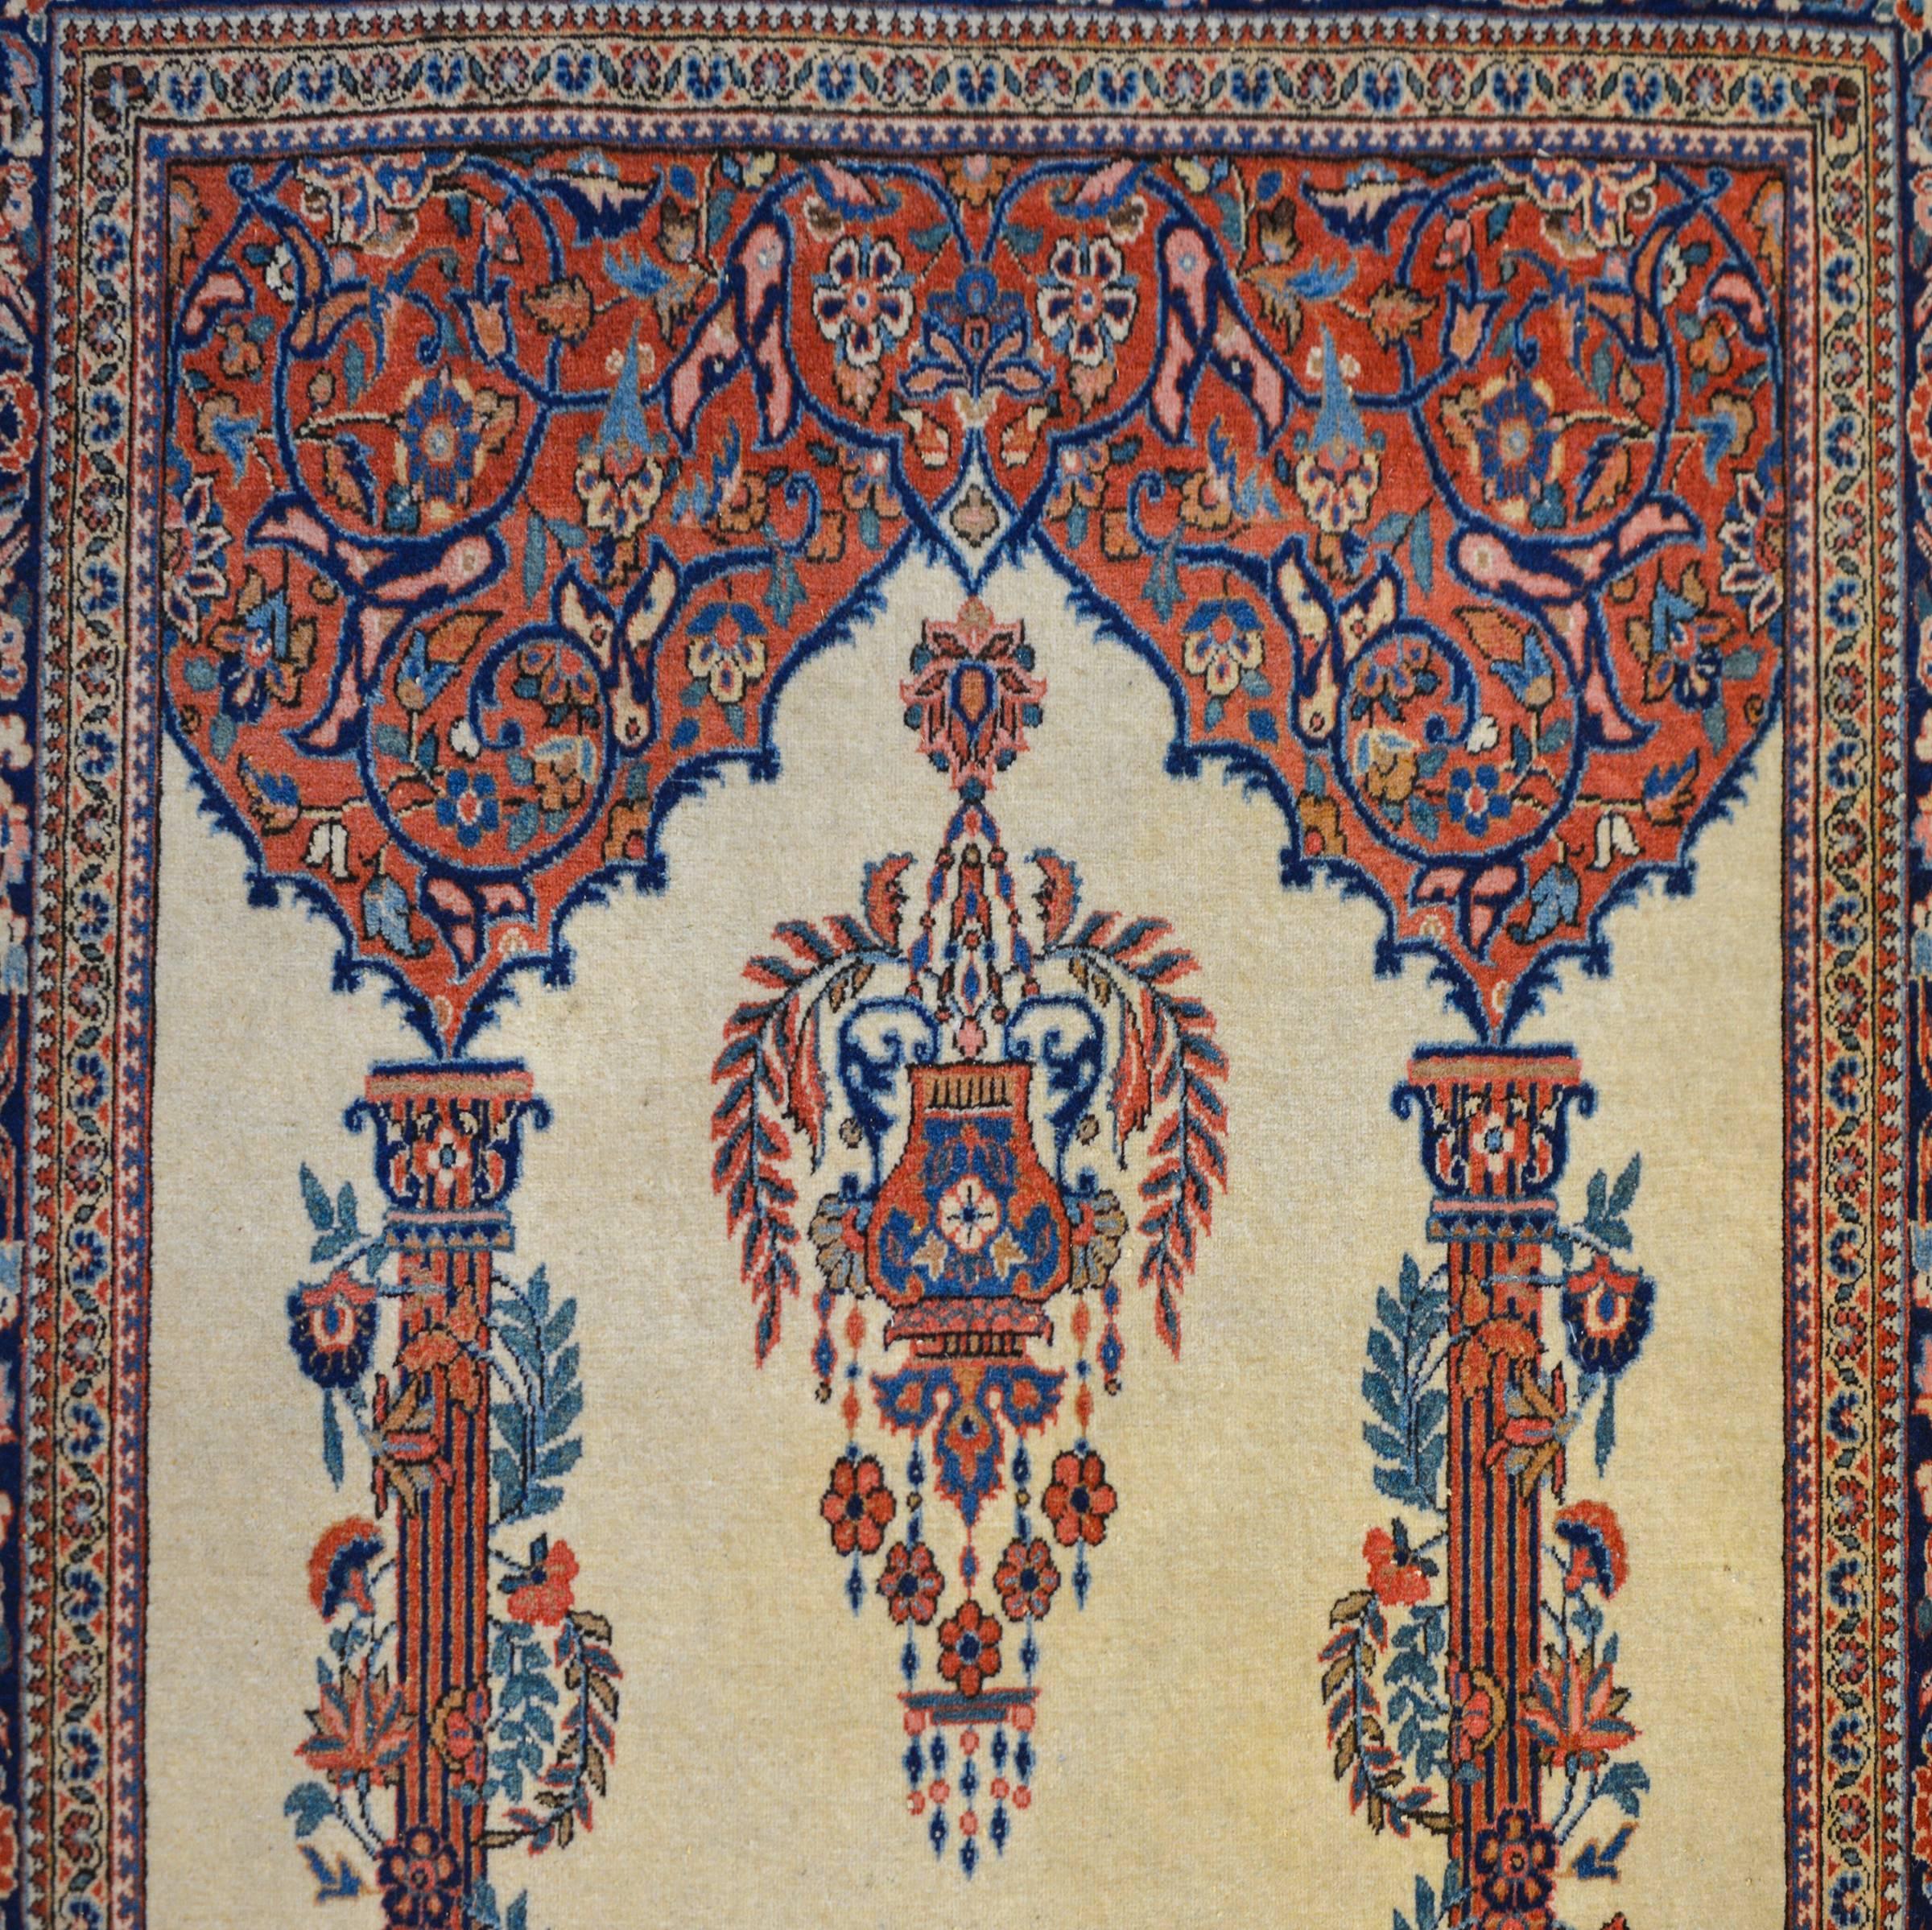 An amazing early 20th century Persian Kashan rug with an architectural design depicting two fluted columns wrapped with scrolling vines and flowers, supporting a vaulted ceiling with arabesque design. A potted planter hangs from the ceiling. The